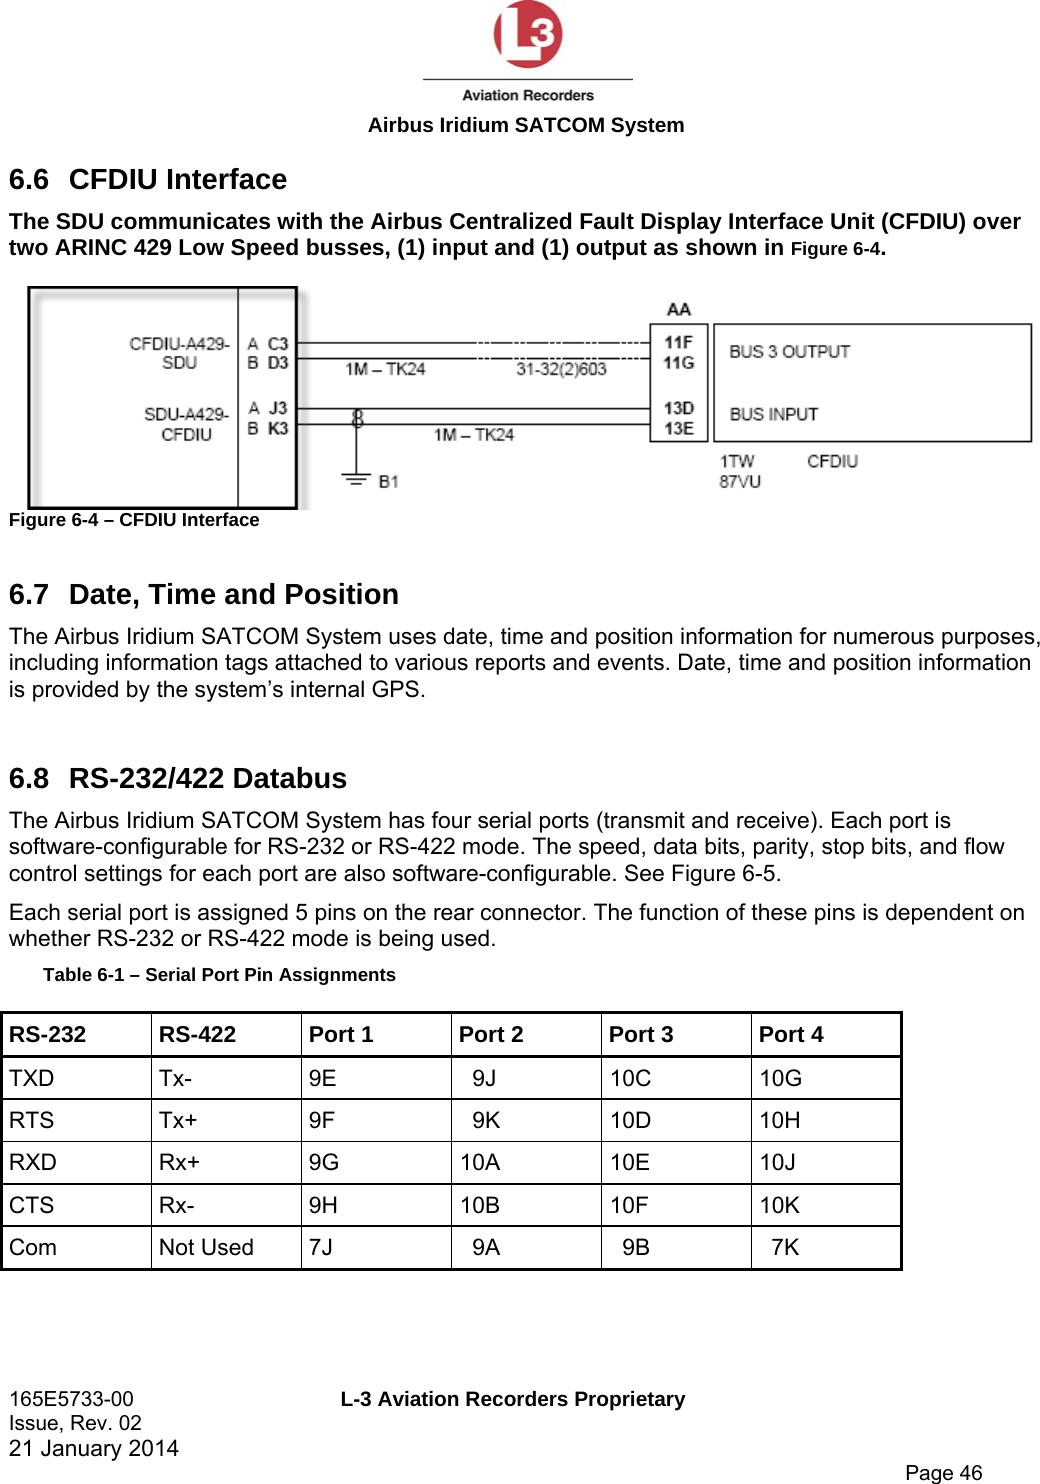  Airbus Iridium SATCOM System 165E5733-00  L-3 Aviation Recorders Proprietary Issue, Rev. 02   21 January 2014      Page 46 6.6 CFDIU Interface The SDU communicates with the Airbus Centralized Fault Display Interface Unit (CFDIU) over two ARINC 429 Low Speed busses, (1) input and (1) output as shown in Figure 6-4.   Figure 6-4 – CFDIU Interface  6.7  Date, Time and Position The Airbus Iridium SATCOM System uses date, time and position information for numerous purposes, including information tags attached to various reports and events. Date, time and position information is provided by the system’s internal GPS.   6.8 RS-232/422 Databus The Airbus Iridium SATCOM System has four serial ports (transmit and receive). Each port is software-configurable for RS-232 or RS-422 mode. The speed, data bits, parity, stop bits, and flow control settings for each port are also software-configurable. See Figure 6-5. Each serial port is assigned 5 pins on the rear connector. The function of these pins is dependent on whether RS-232 or RS-422 mode is being used. Table 6-1 – Serial Port Pin Assignments RS-232  RS-422  Port 1  Port 2  Port 3  Port 4 TXD Tx-  9E  9J  10C  10G RTS Tx+  9F  9K  10D  10H RXD Rx+  9G  10A  10E  10J CTS Rx-  9H  10B  10F  10K Com Not Used 7J  9A  9B  7K  